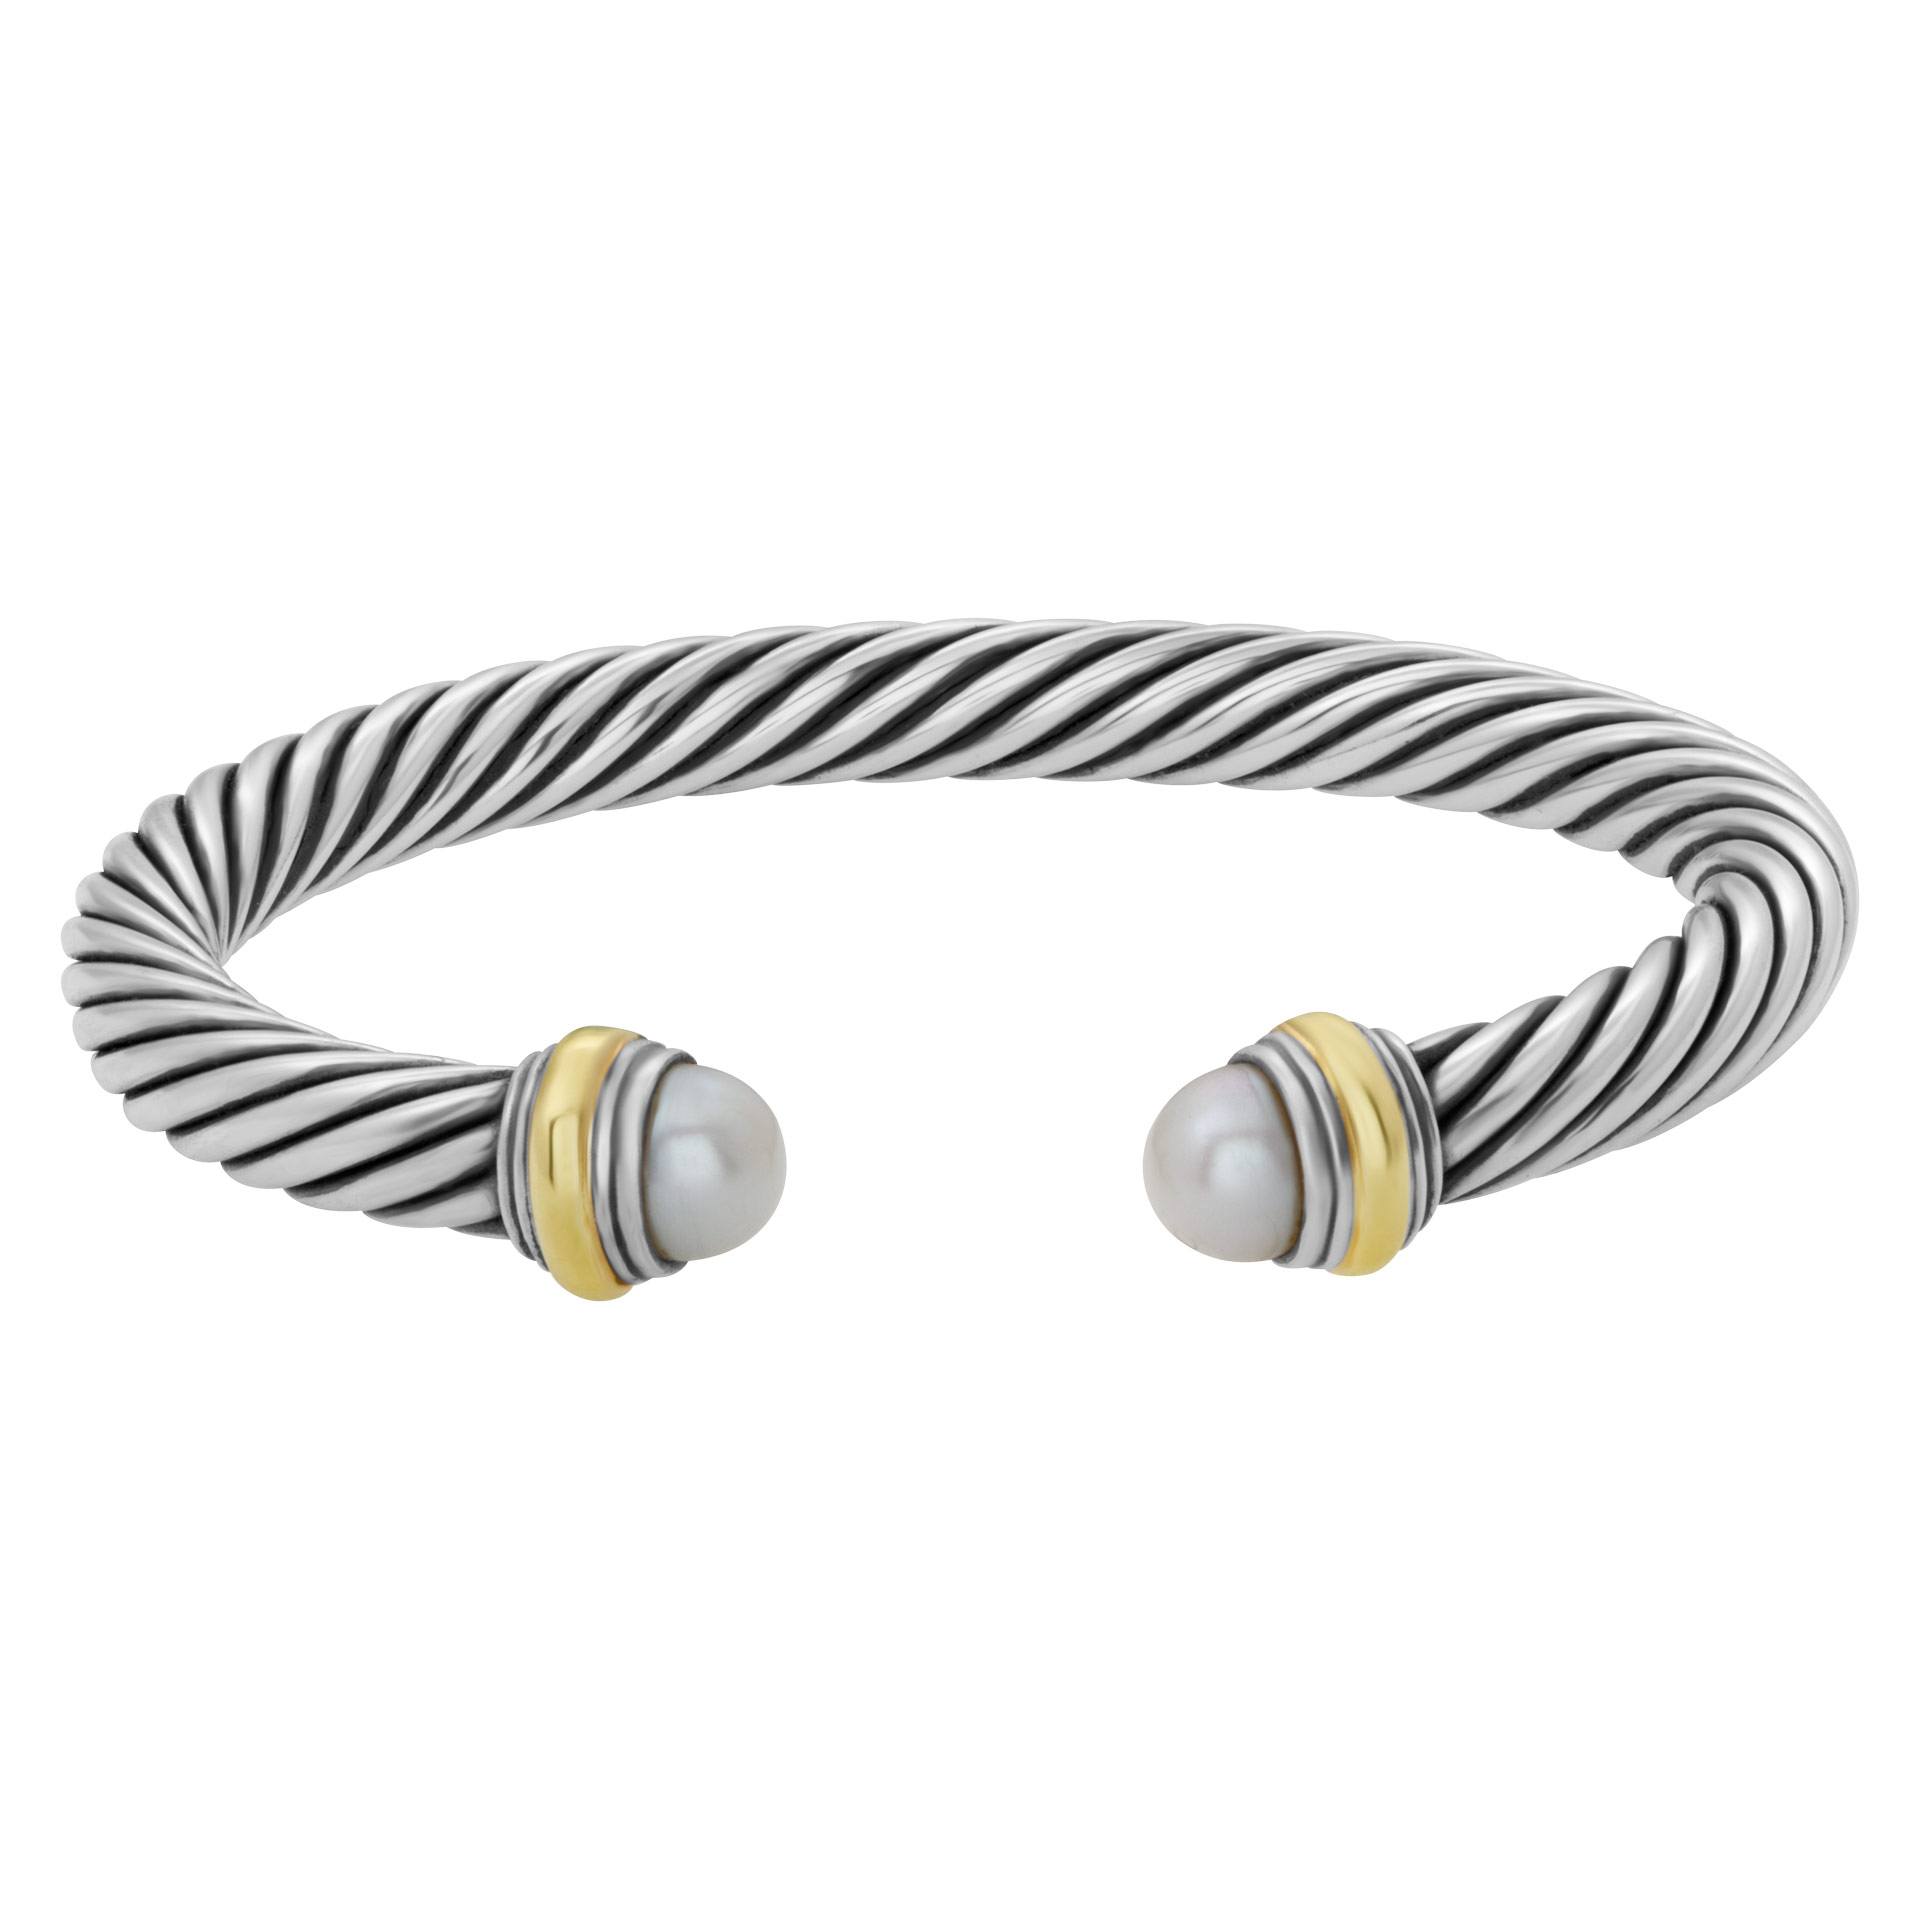 David Yurman cable cuff in sterling silver & 14k adoranted with pearls